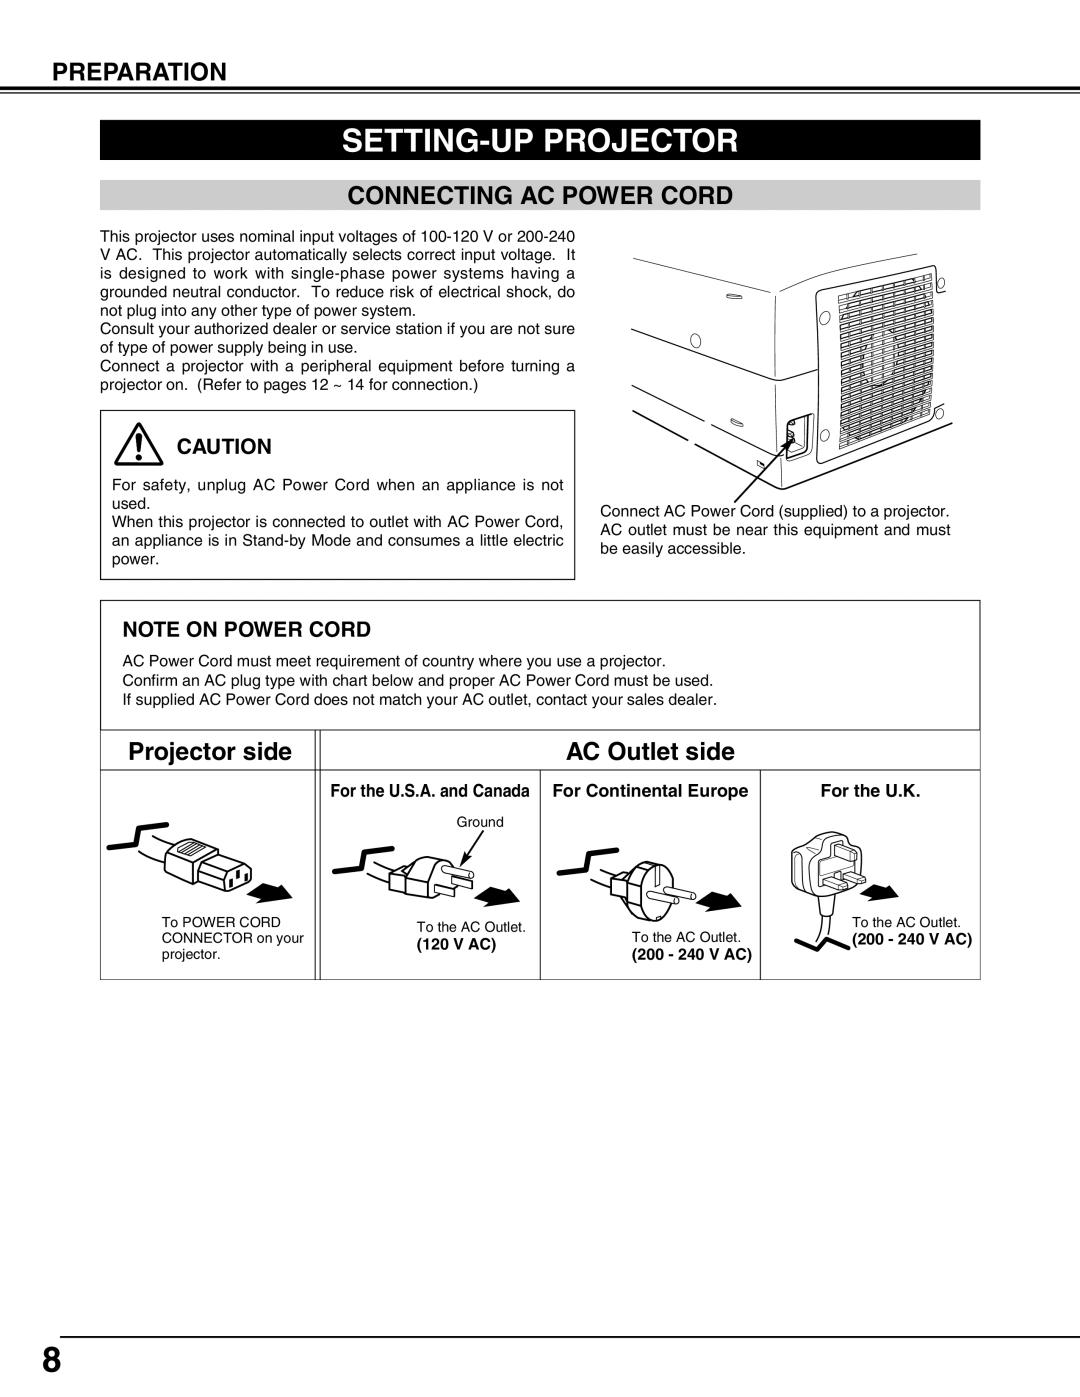 Sanyo PLC-XP55L owner manual Setting-Upprojector, For the U.S.A. and Canada, V Ac, 200 - 240 V AC 